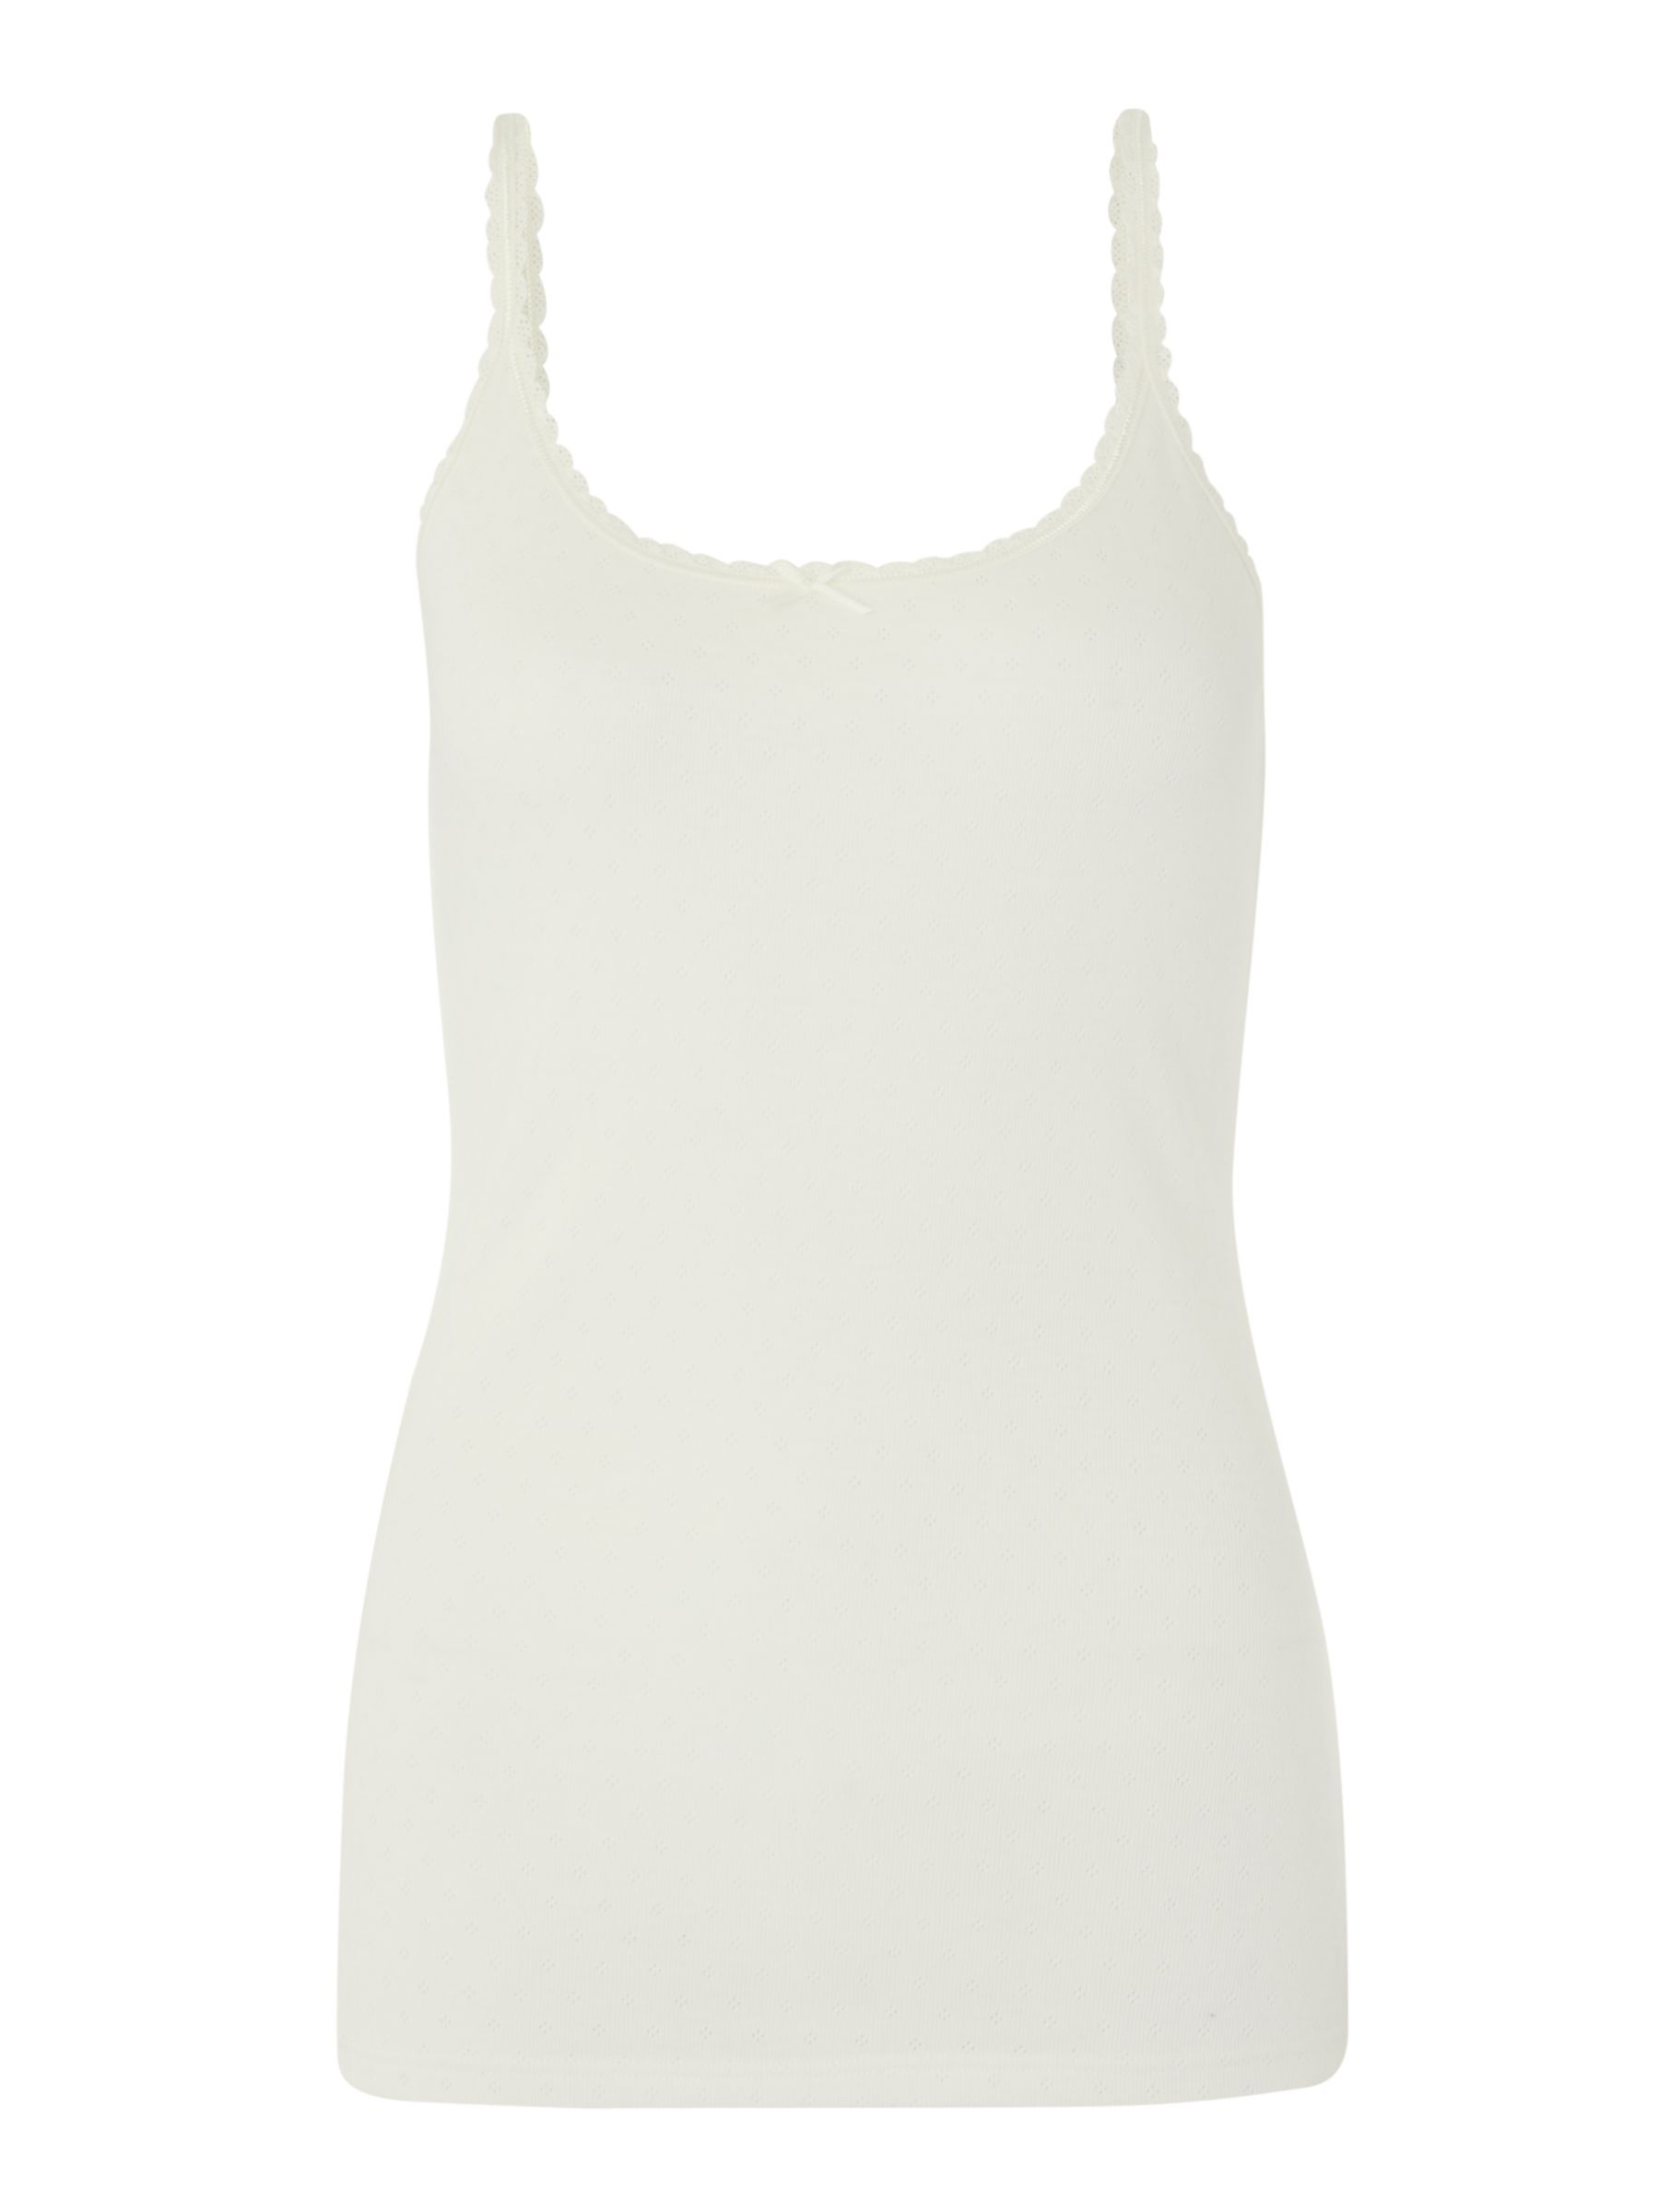 John Lewis Thermal Pointelle Camisole, Ivory at John Lewis & Partners